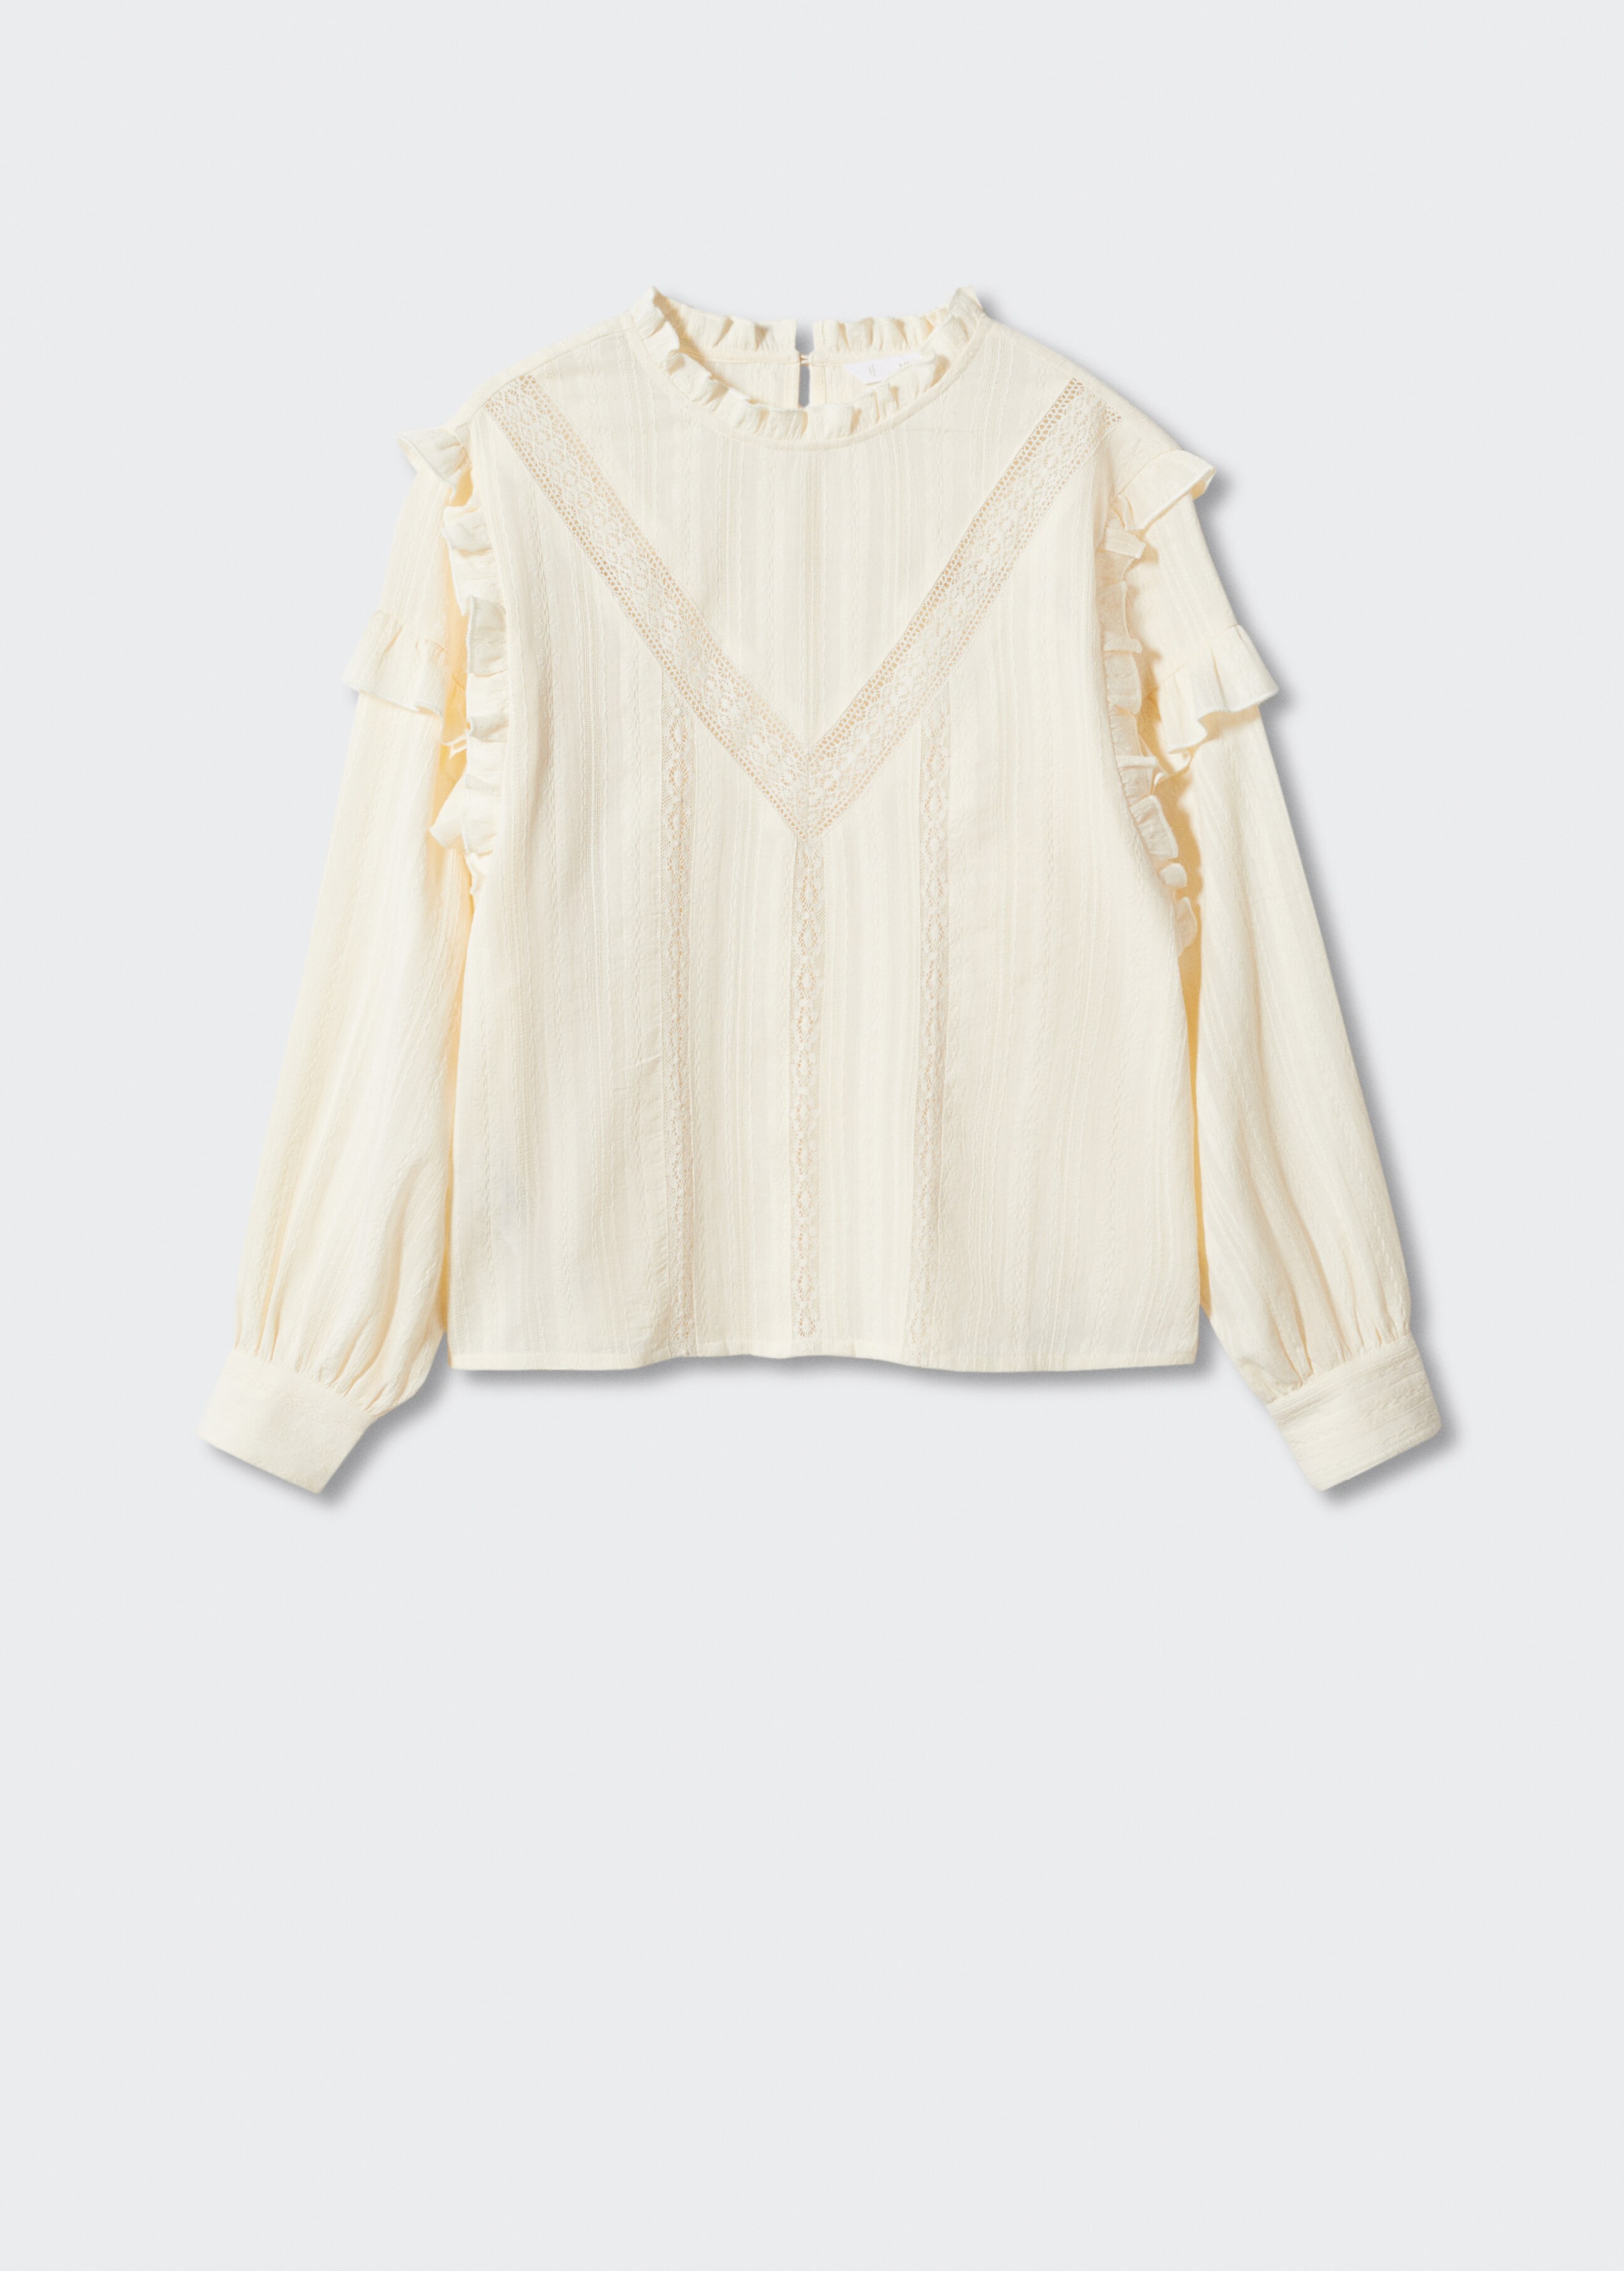 Ruffled embroidered blouse - Article without model